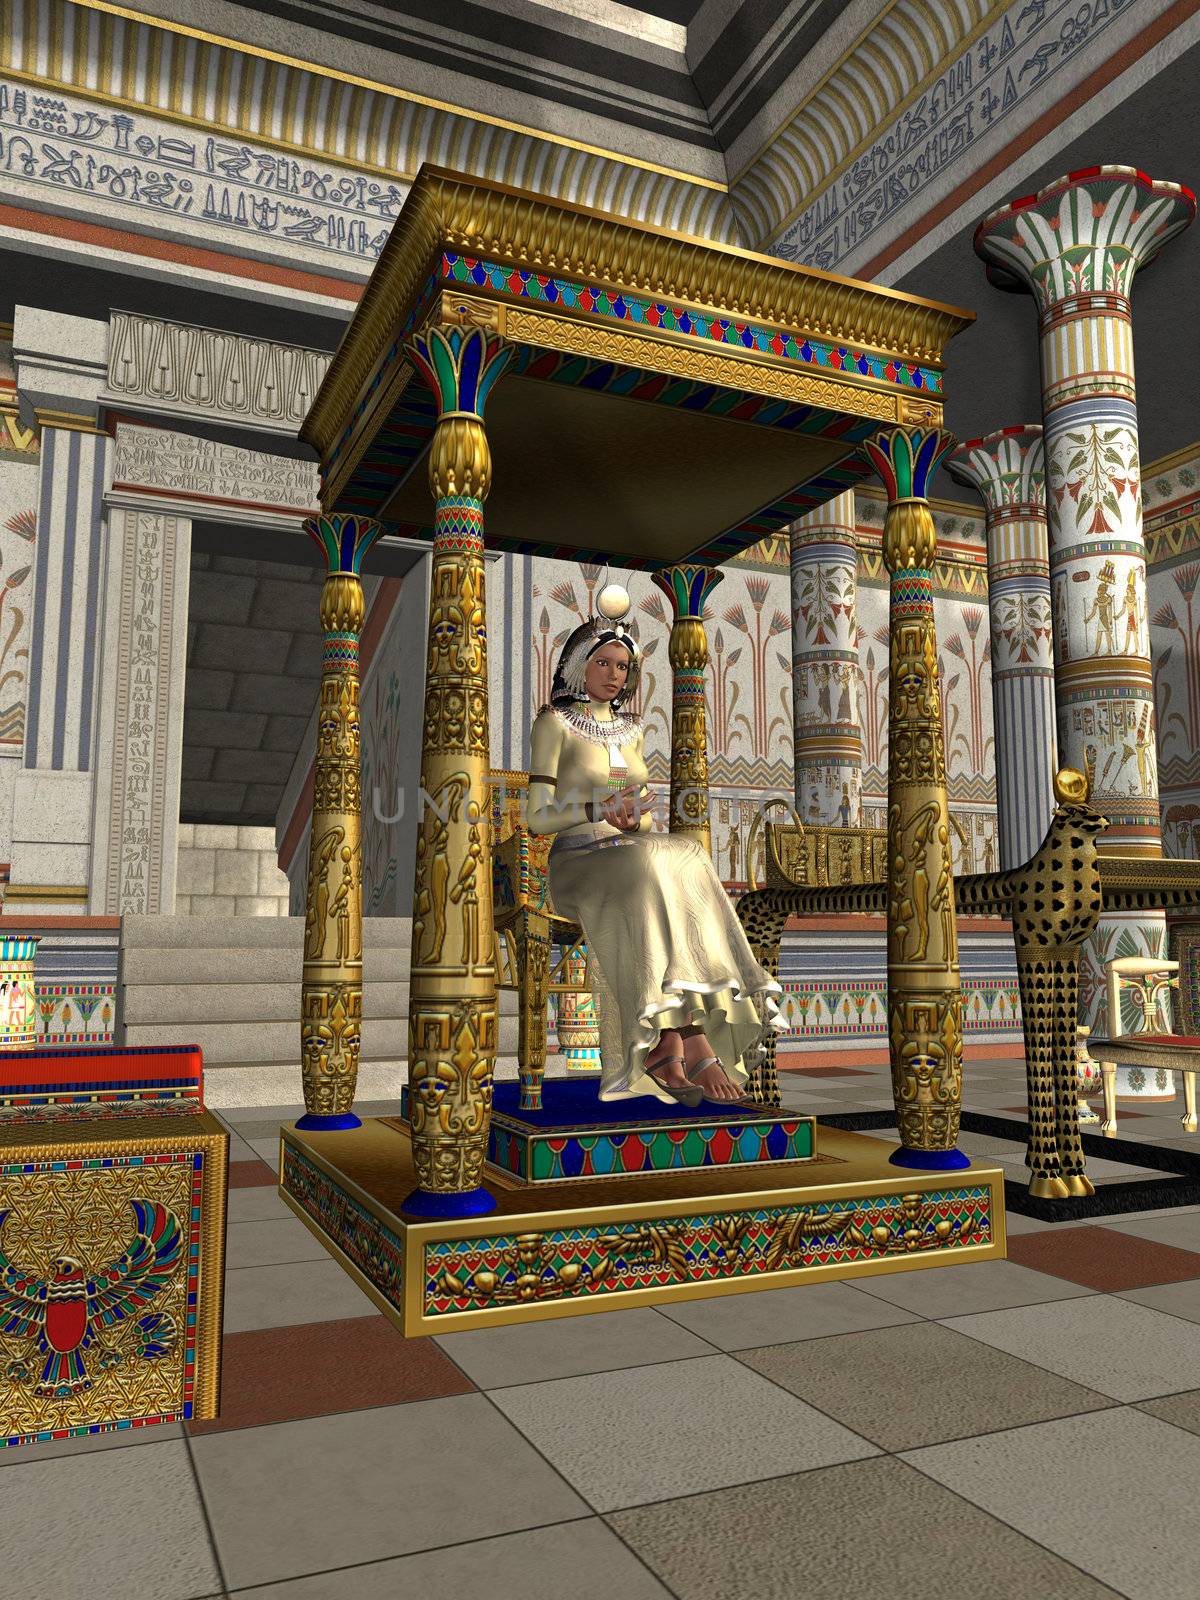 A queen sits on her royal throne in the ancient Egyptian dynasty.